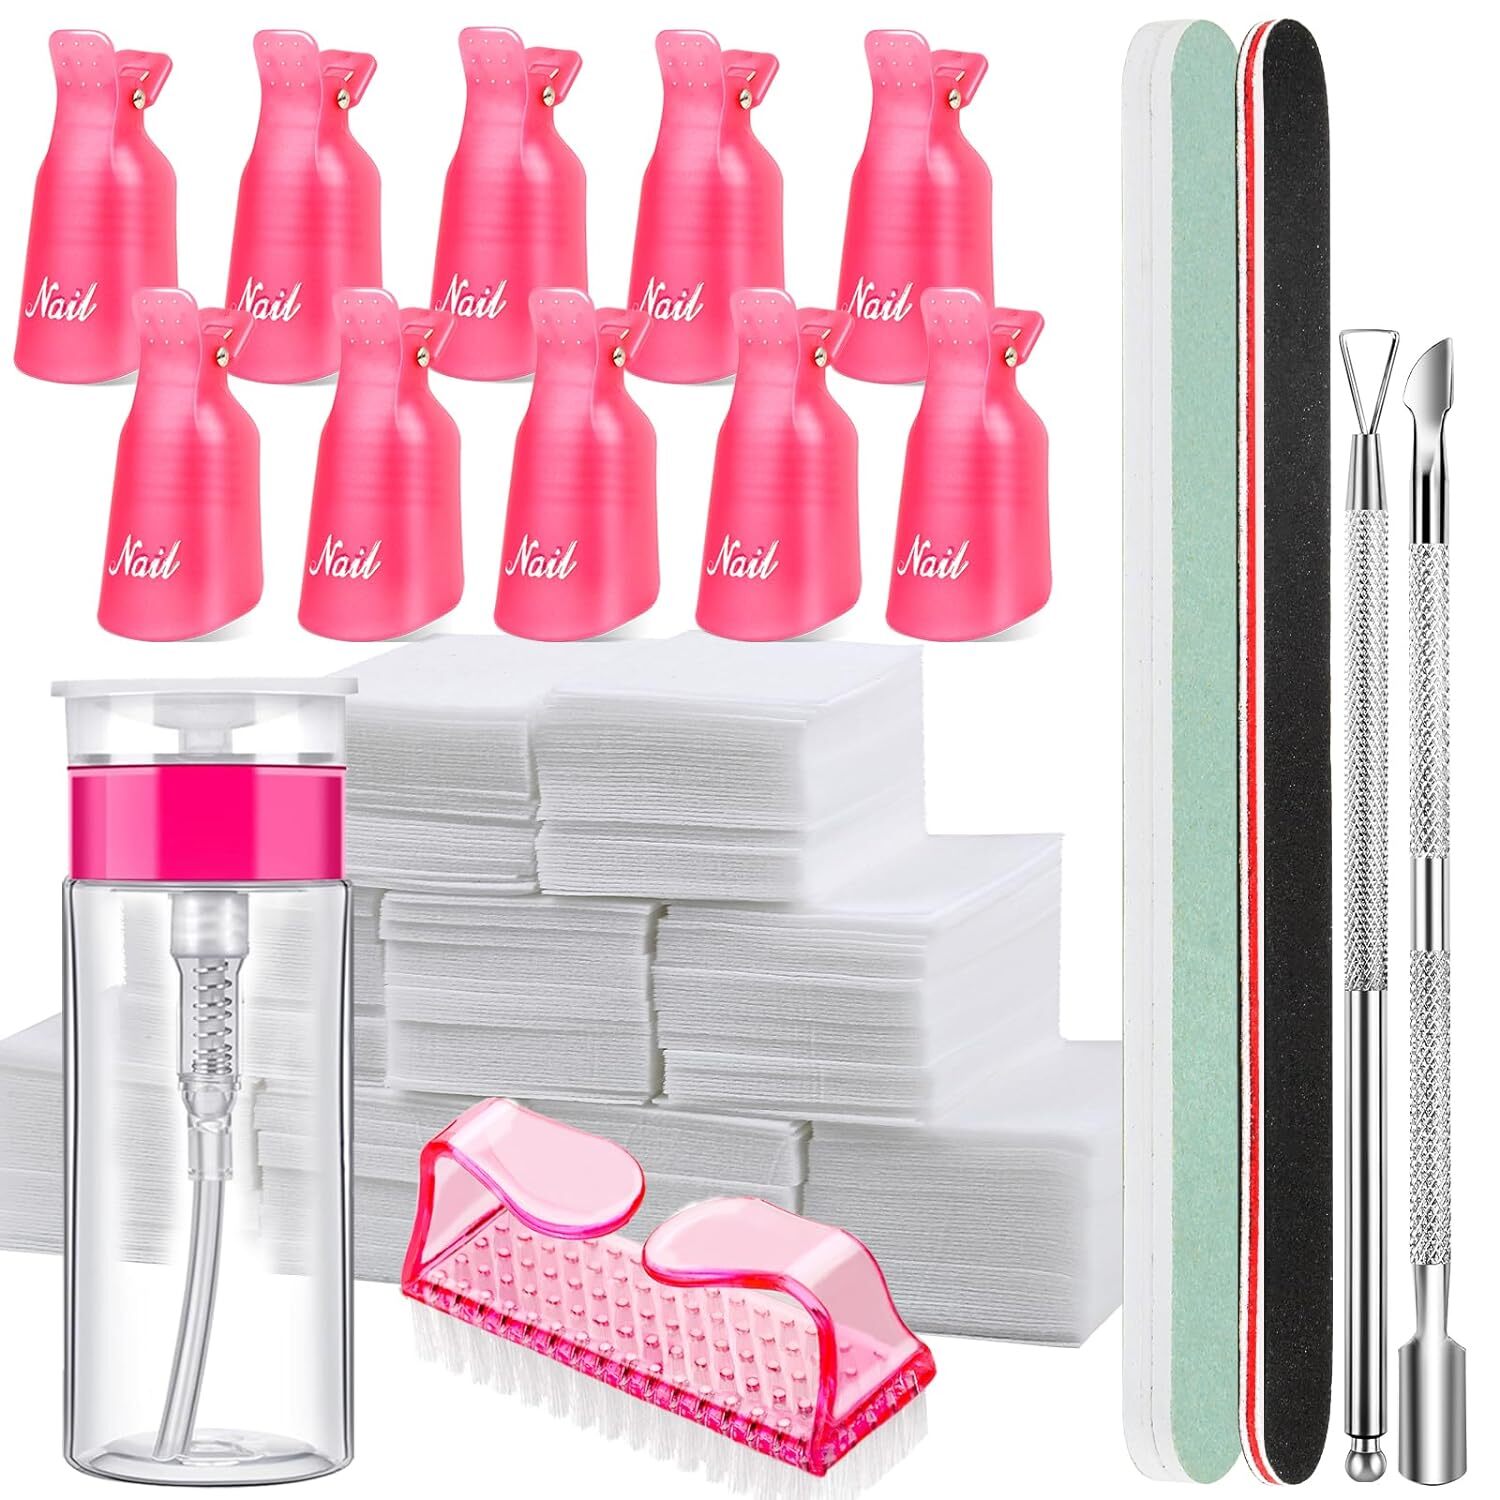 Various nail salon supplies including bottles, buffers, a cleaning brush, files, and tweezers